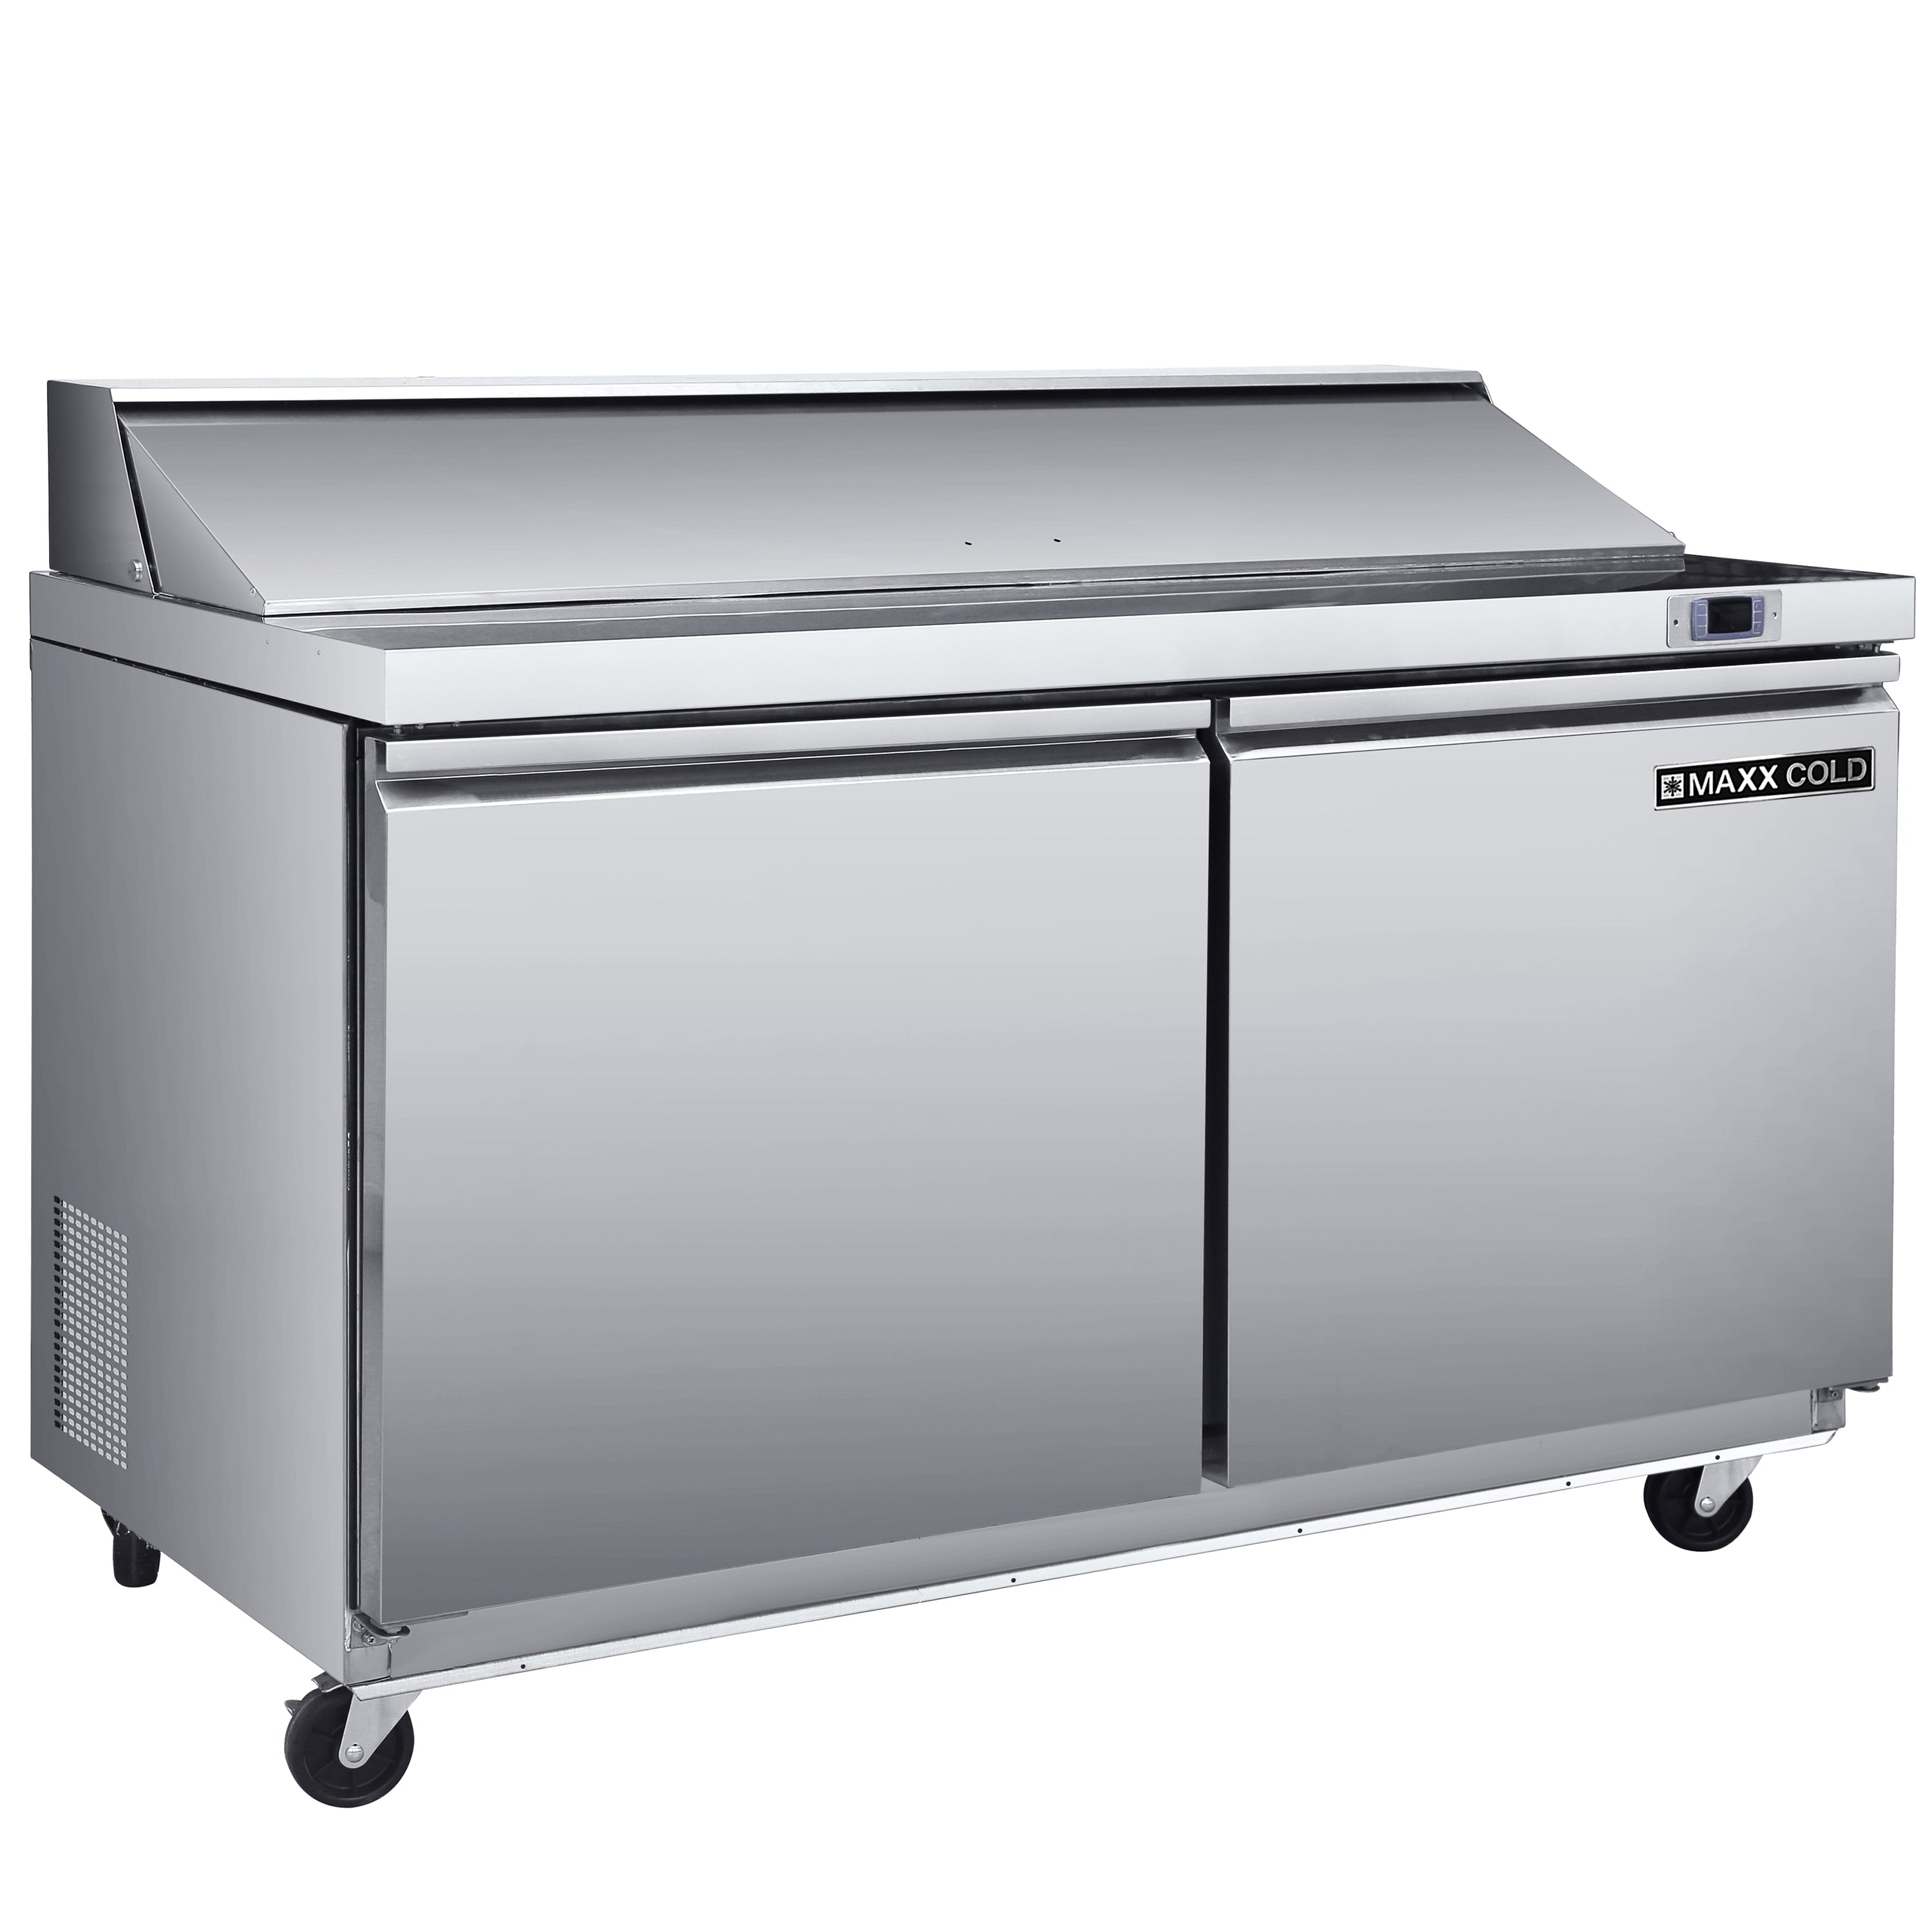 Maxx Cold - MXSR48SHC, Maxx Cold Two-Door Refrigerated Sandwich and Salad Prep Station, 48.4"W, 13.77 cu. ft. Storage Capacity, Equipped with (6) 4" Deep Pans and Cutting Board, in Stainless-Steel